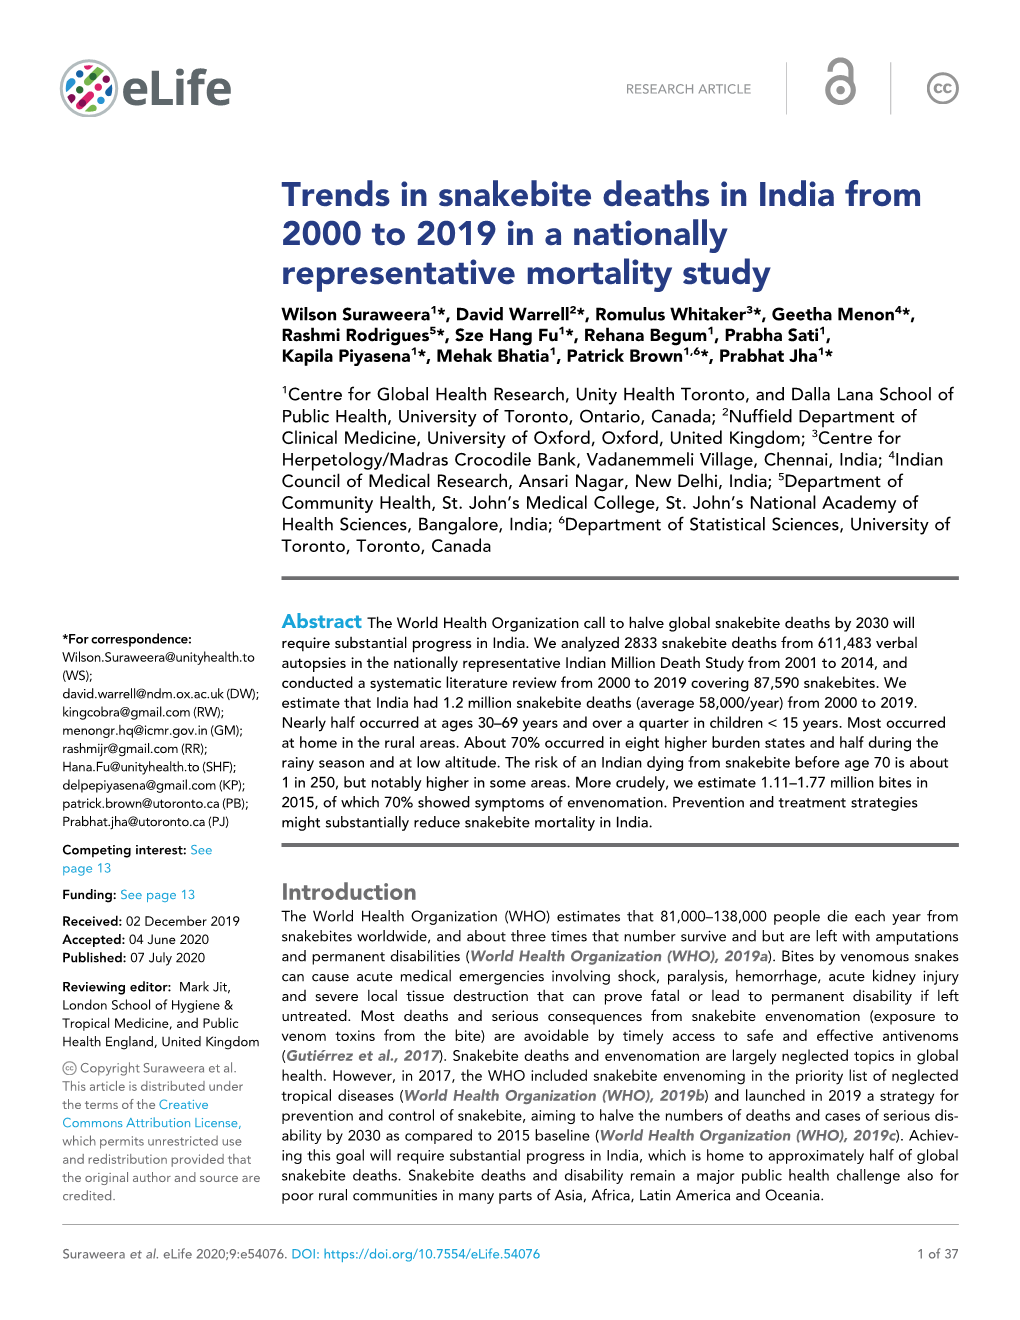 Trends in Snakebite Deaths in India from 2000 to 2019 in a Nationally